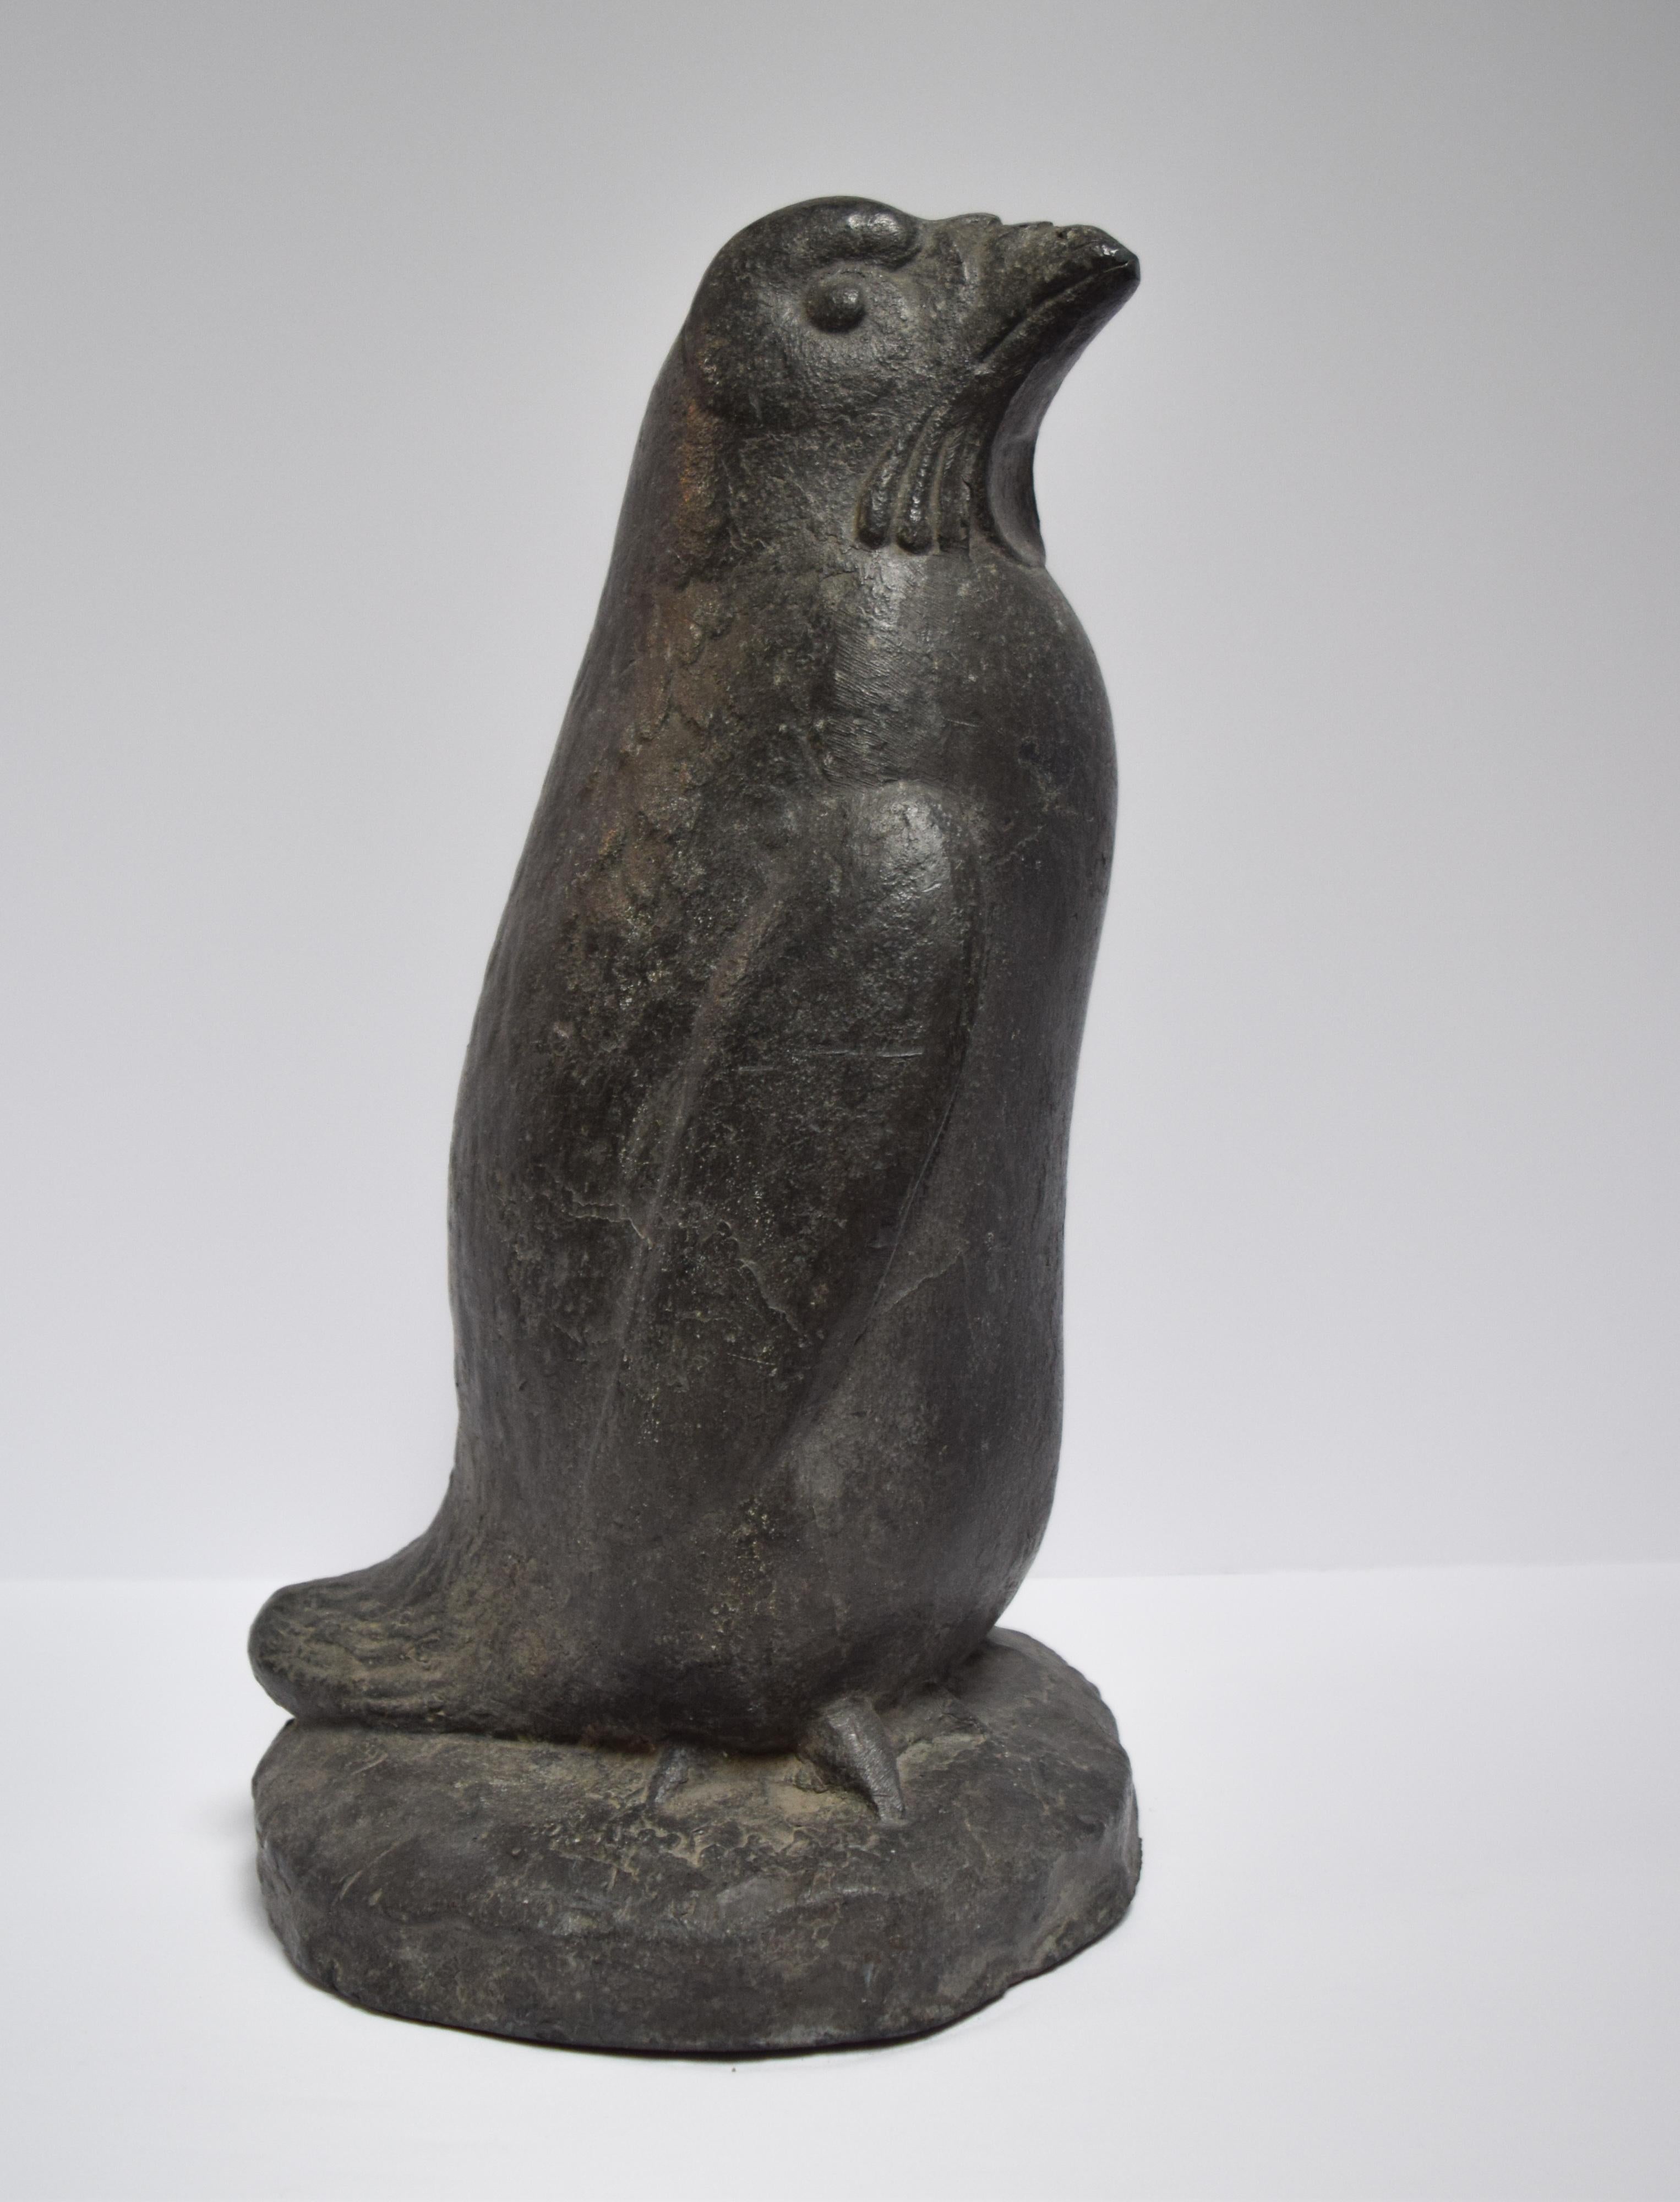 In 1895, Belle Isle in Detroit was home to many animals of the Detroit Zoo. Despite efforts to revive the zoo that housed over 150 animals, the zoo was closed down in the early 2000s. This lead penguin is a memento from the incredible architecture